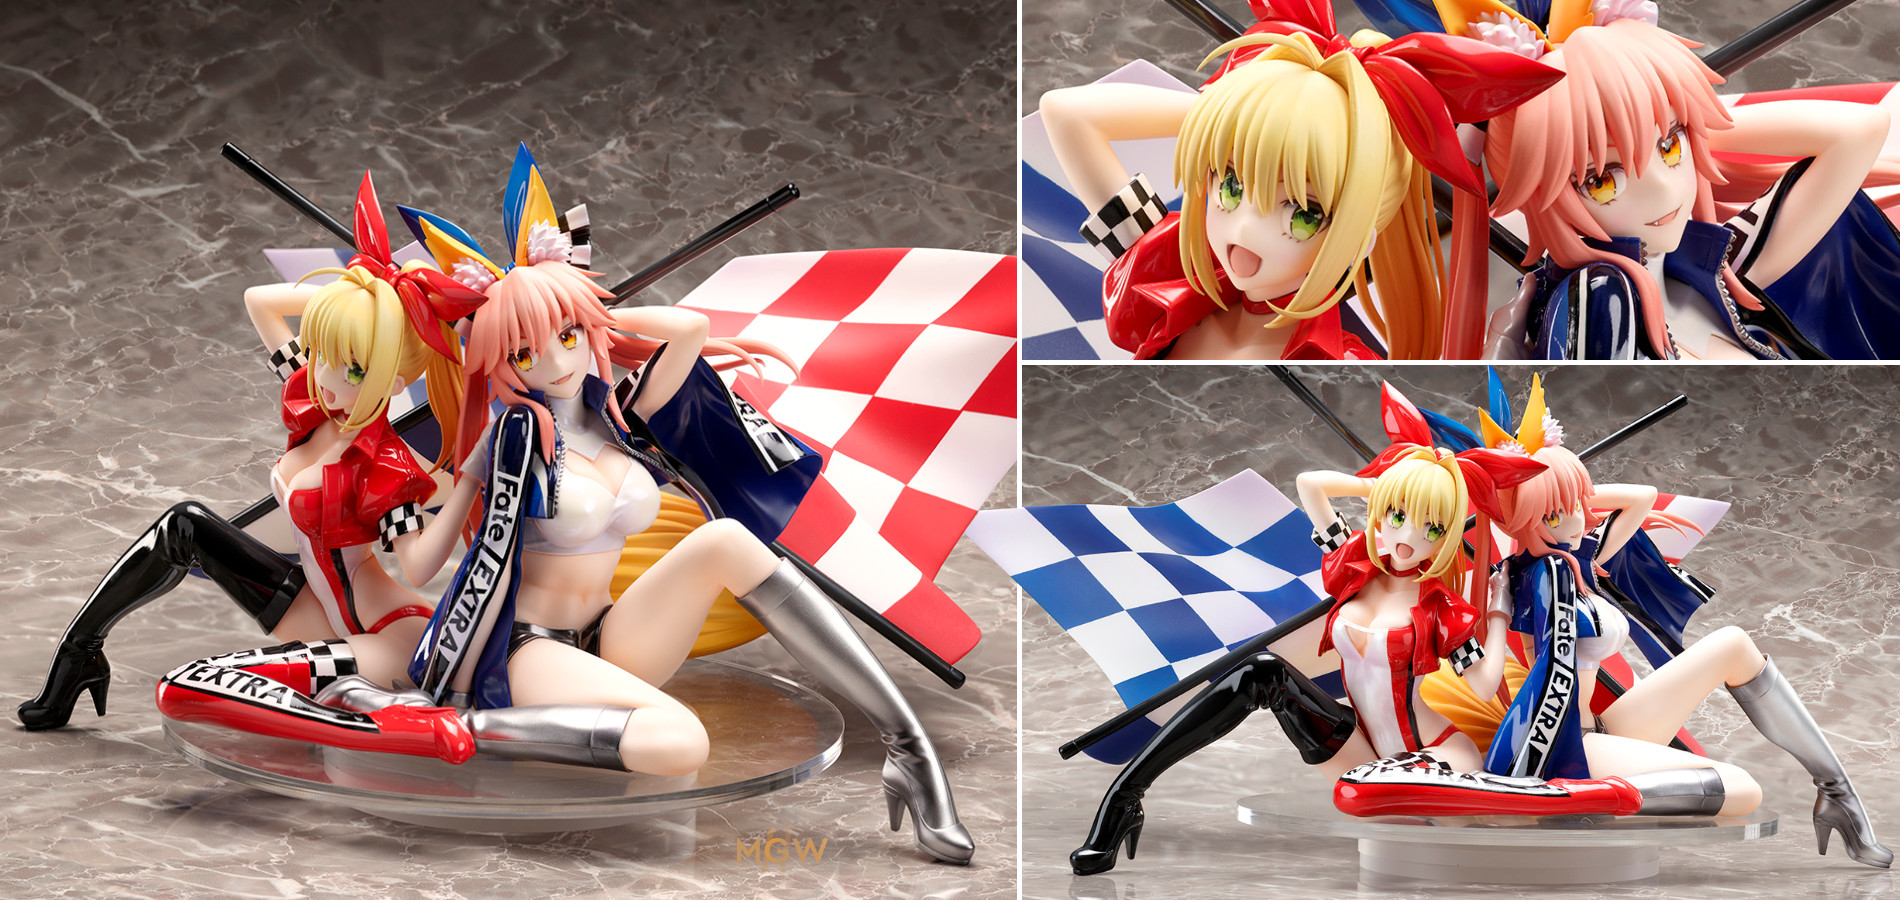 Nero Claudius & Tamamo no Mae TYPE-MOON Racing ver. by plusone & STRONGER from Fate/EXTRA MyGrailWatch Anime Figure Pre-order Guide